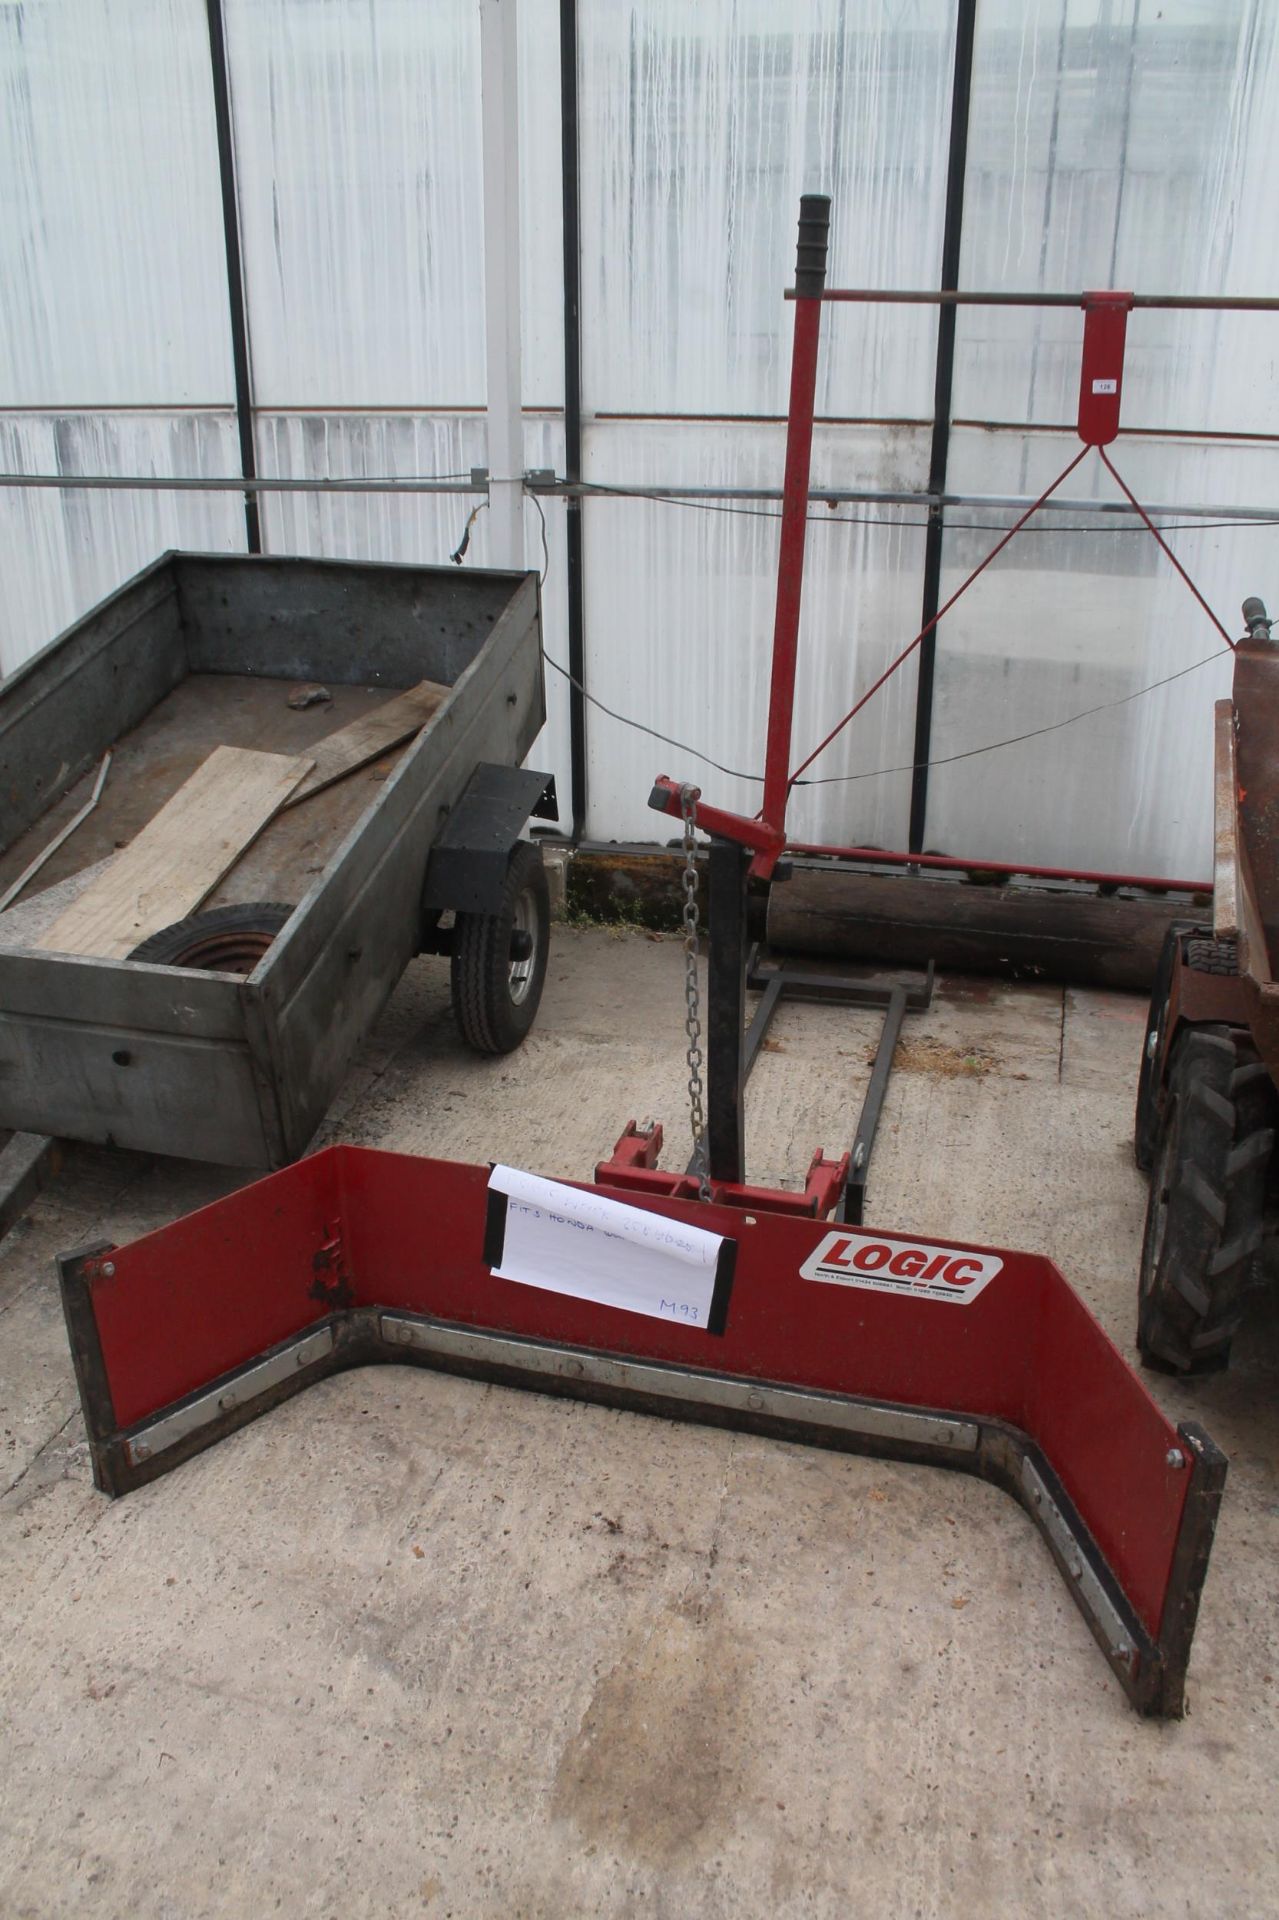 A LOGIC MANURE SRAPPER/SNOW PLOUGH ONLY USED TWICE FITS A HONDA QUAD + VAT - Image 3 of 3